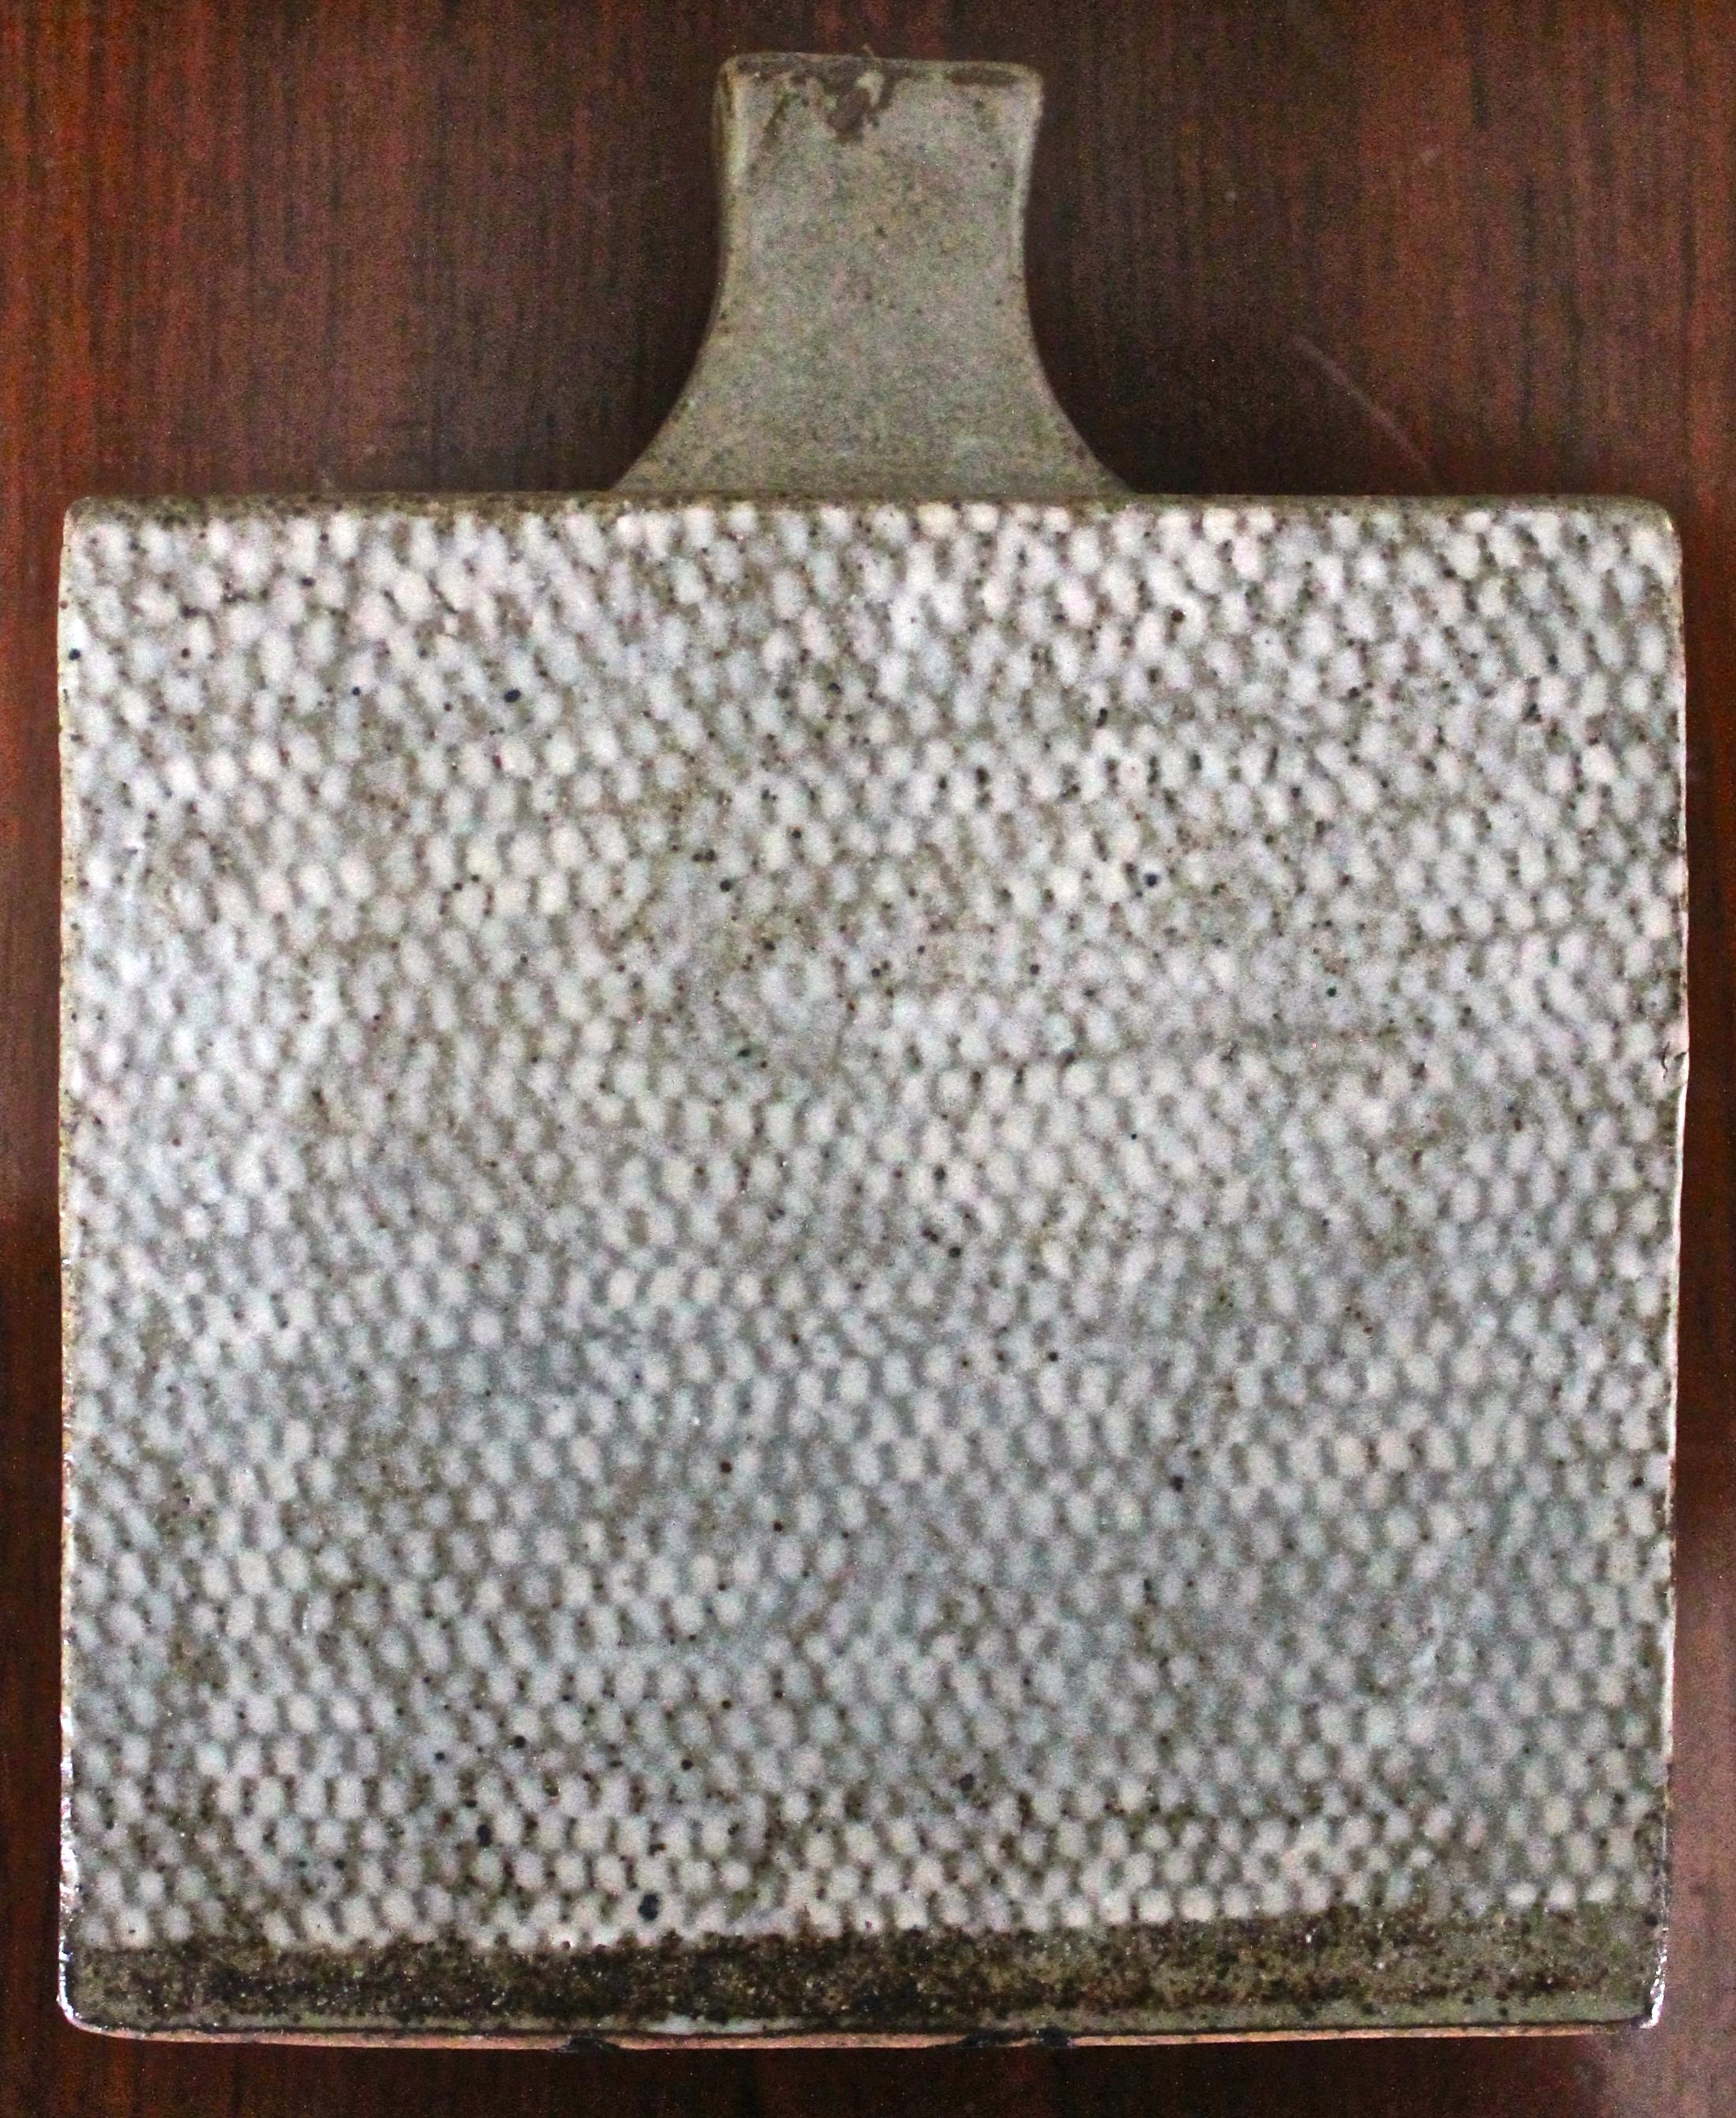 Beautiful flask in the tradition of Hamada, but with the original embossed textured fish net innovation of his protoge Tatsuzo Shimaoka (1996 Japanese National Living Treasure).